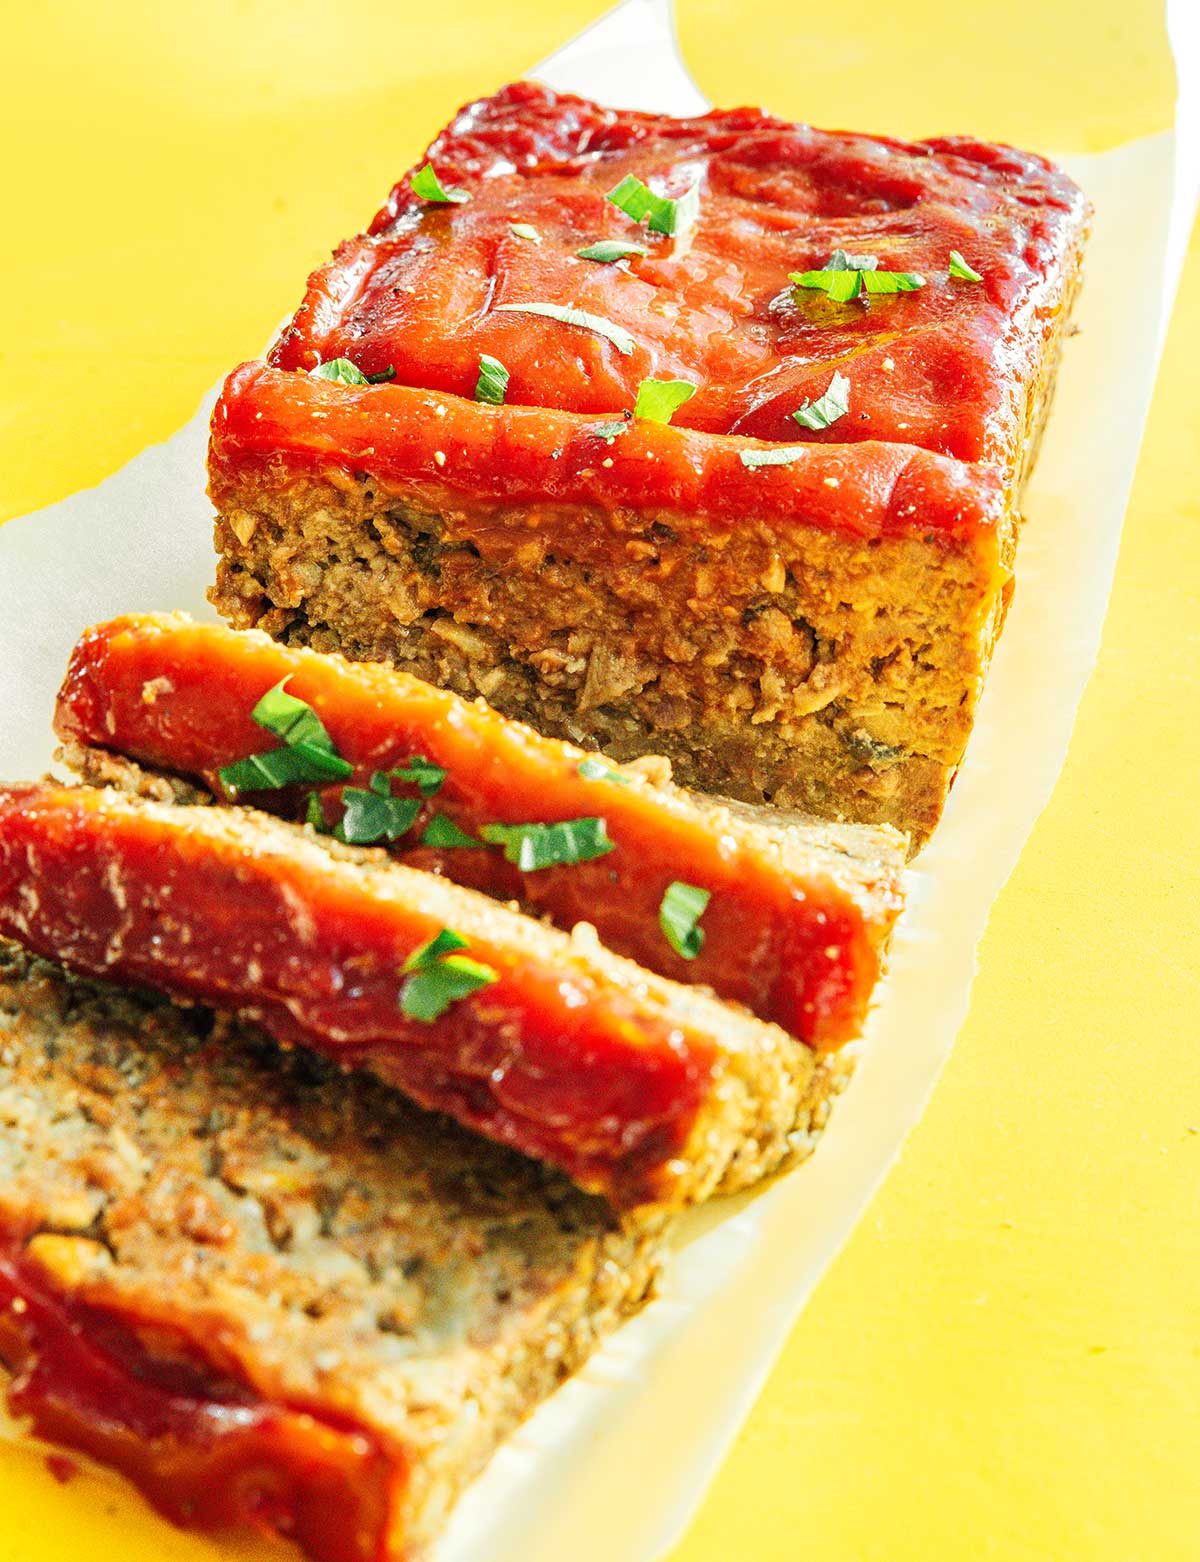 An up-close image displaying the details of mushroom meatloaf